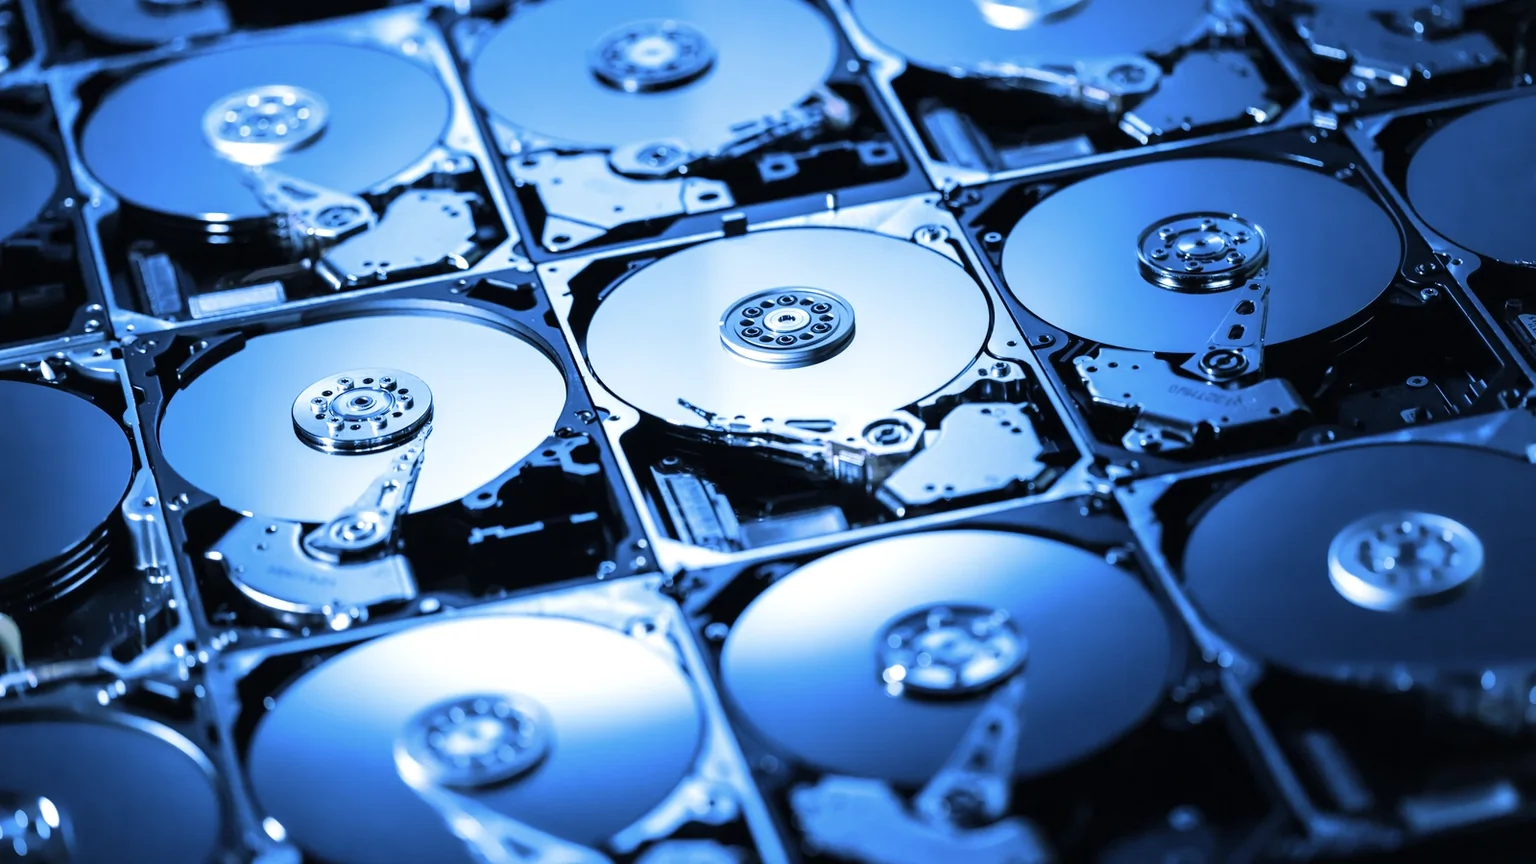 Hard drives are used to "farm" the Chia cryptocurrency. Image: Shutterstock